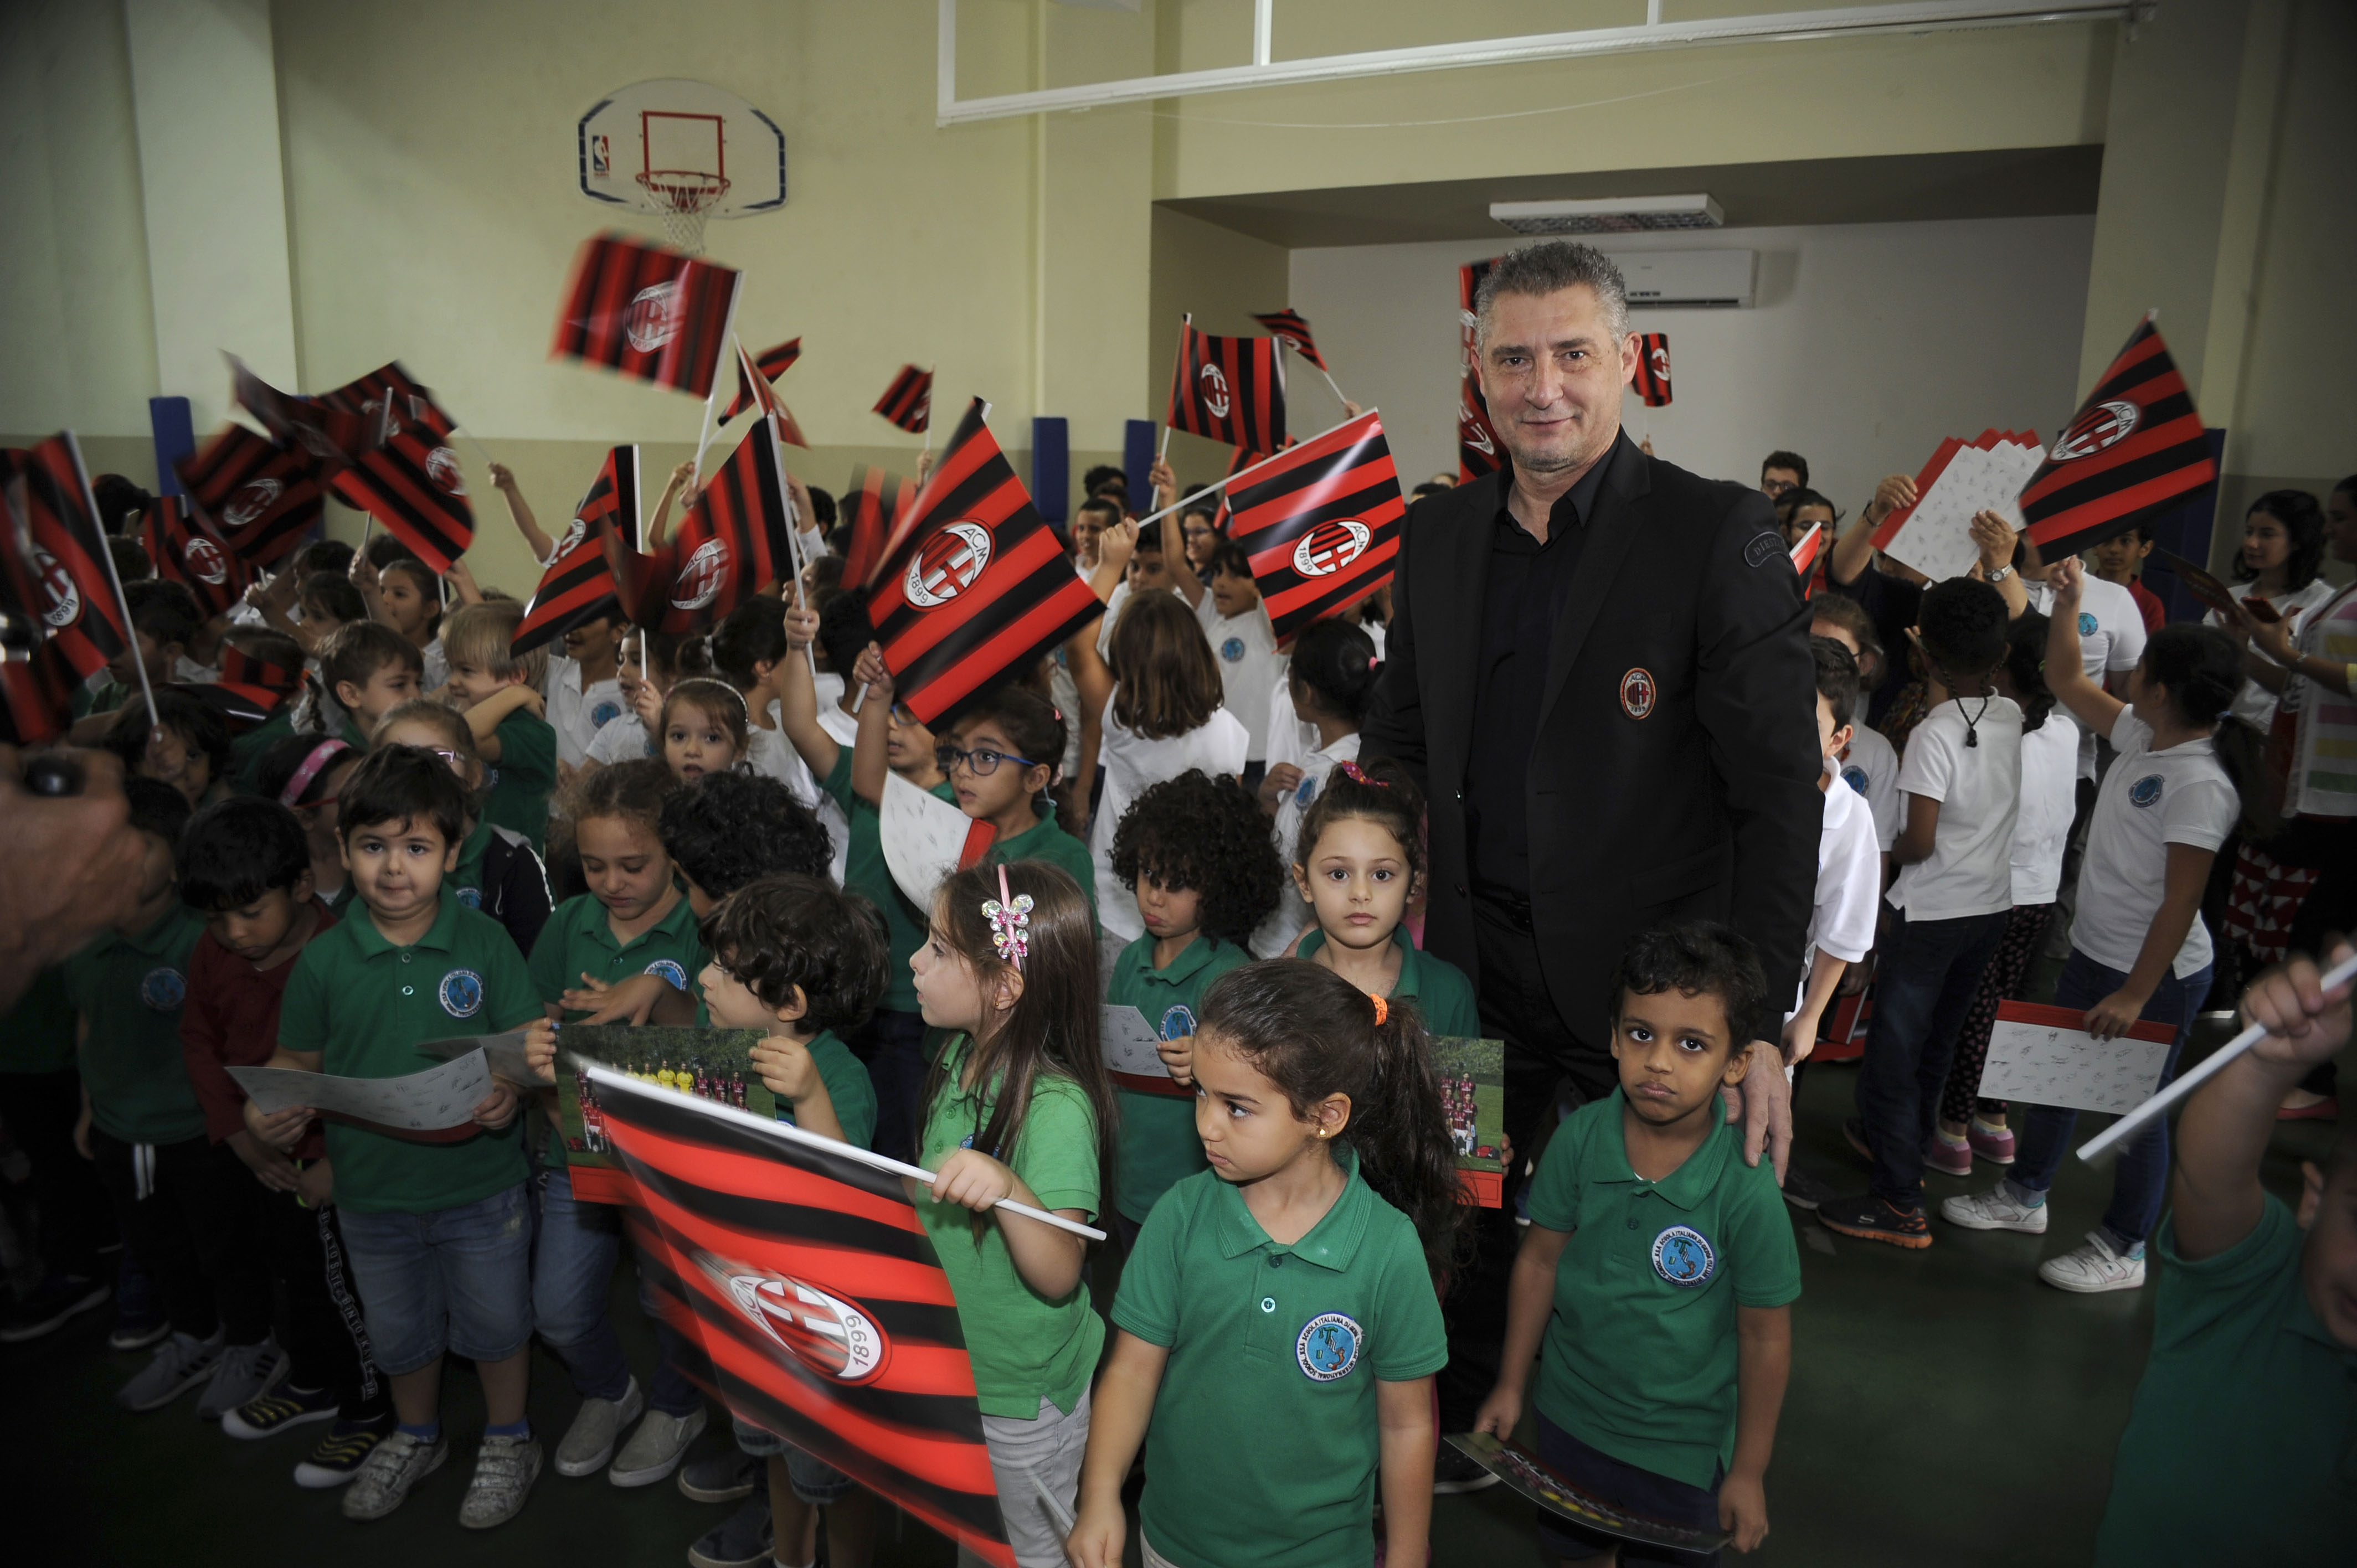 AC Milan, Juventus And Lega Serie A Delegations Visit The Italian School in Jeddah - Italian Supercup Previews